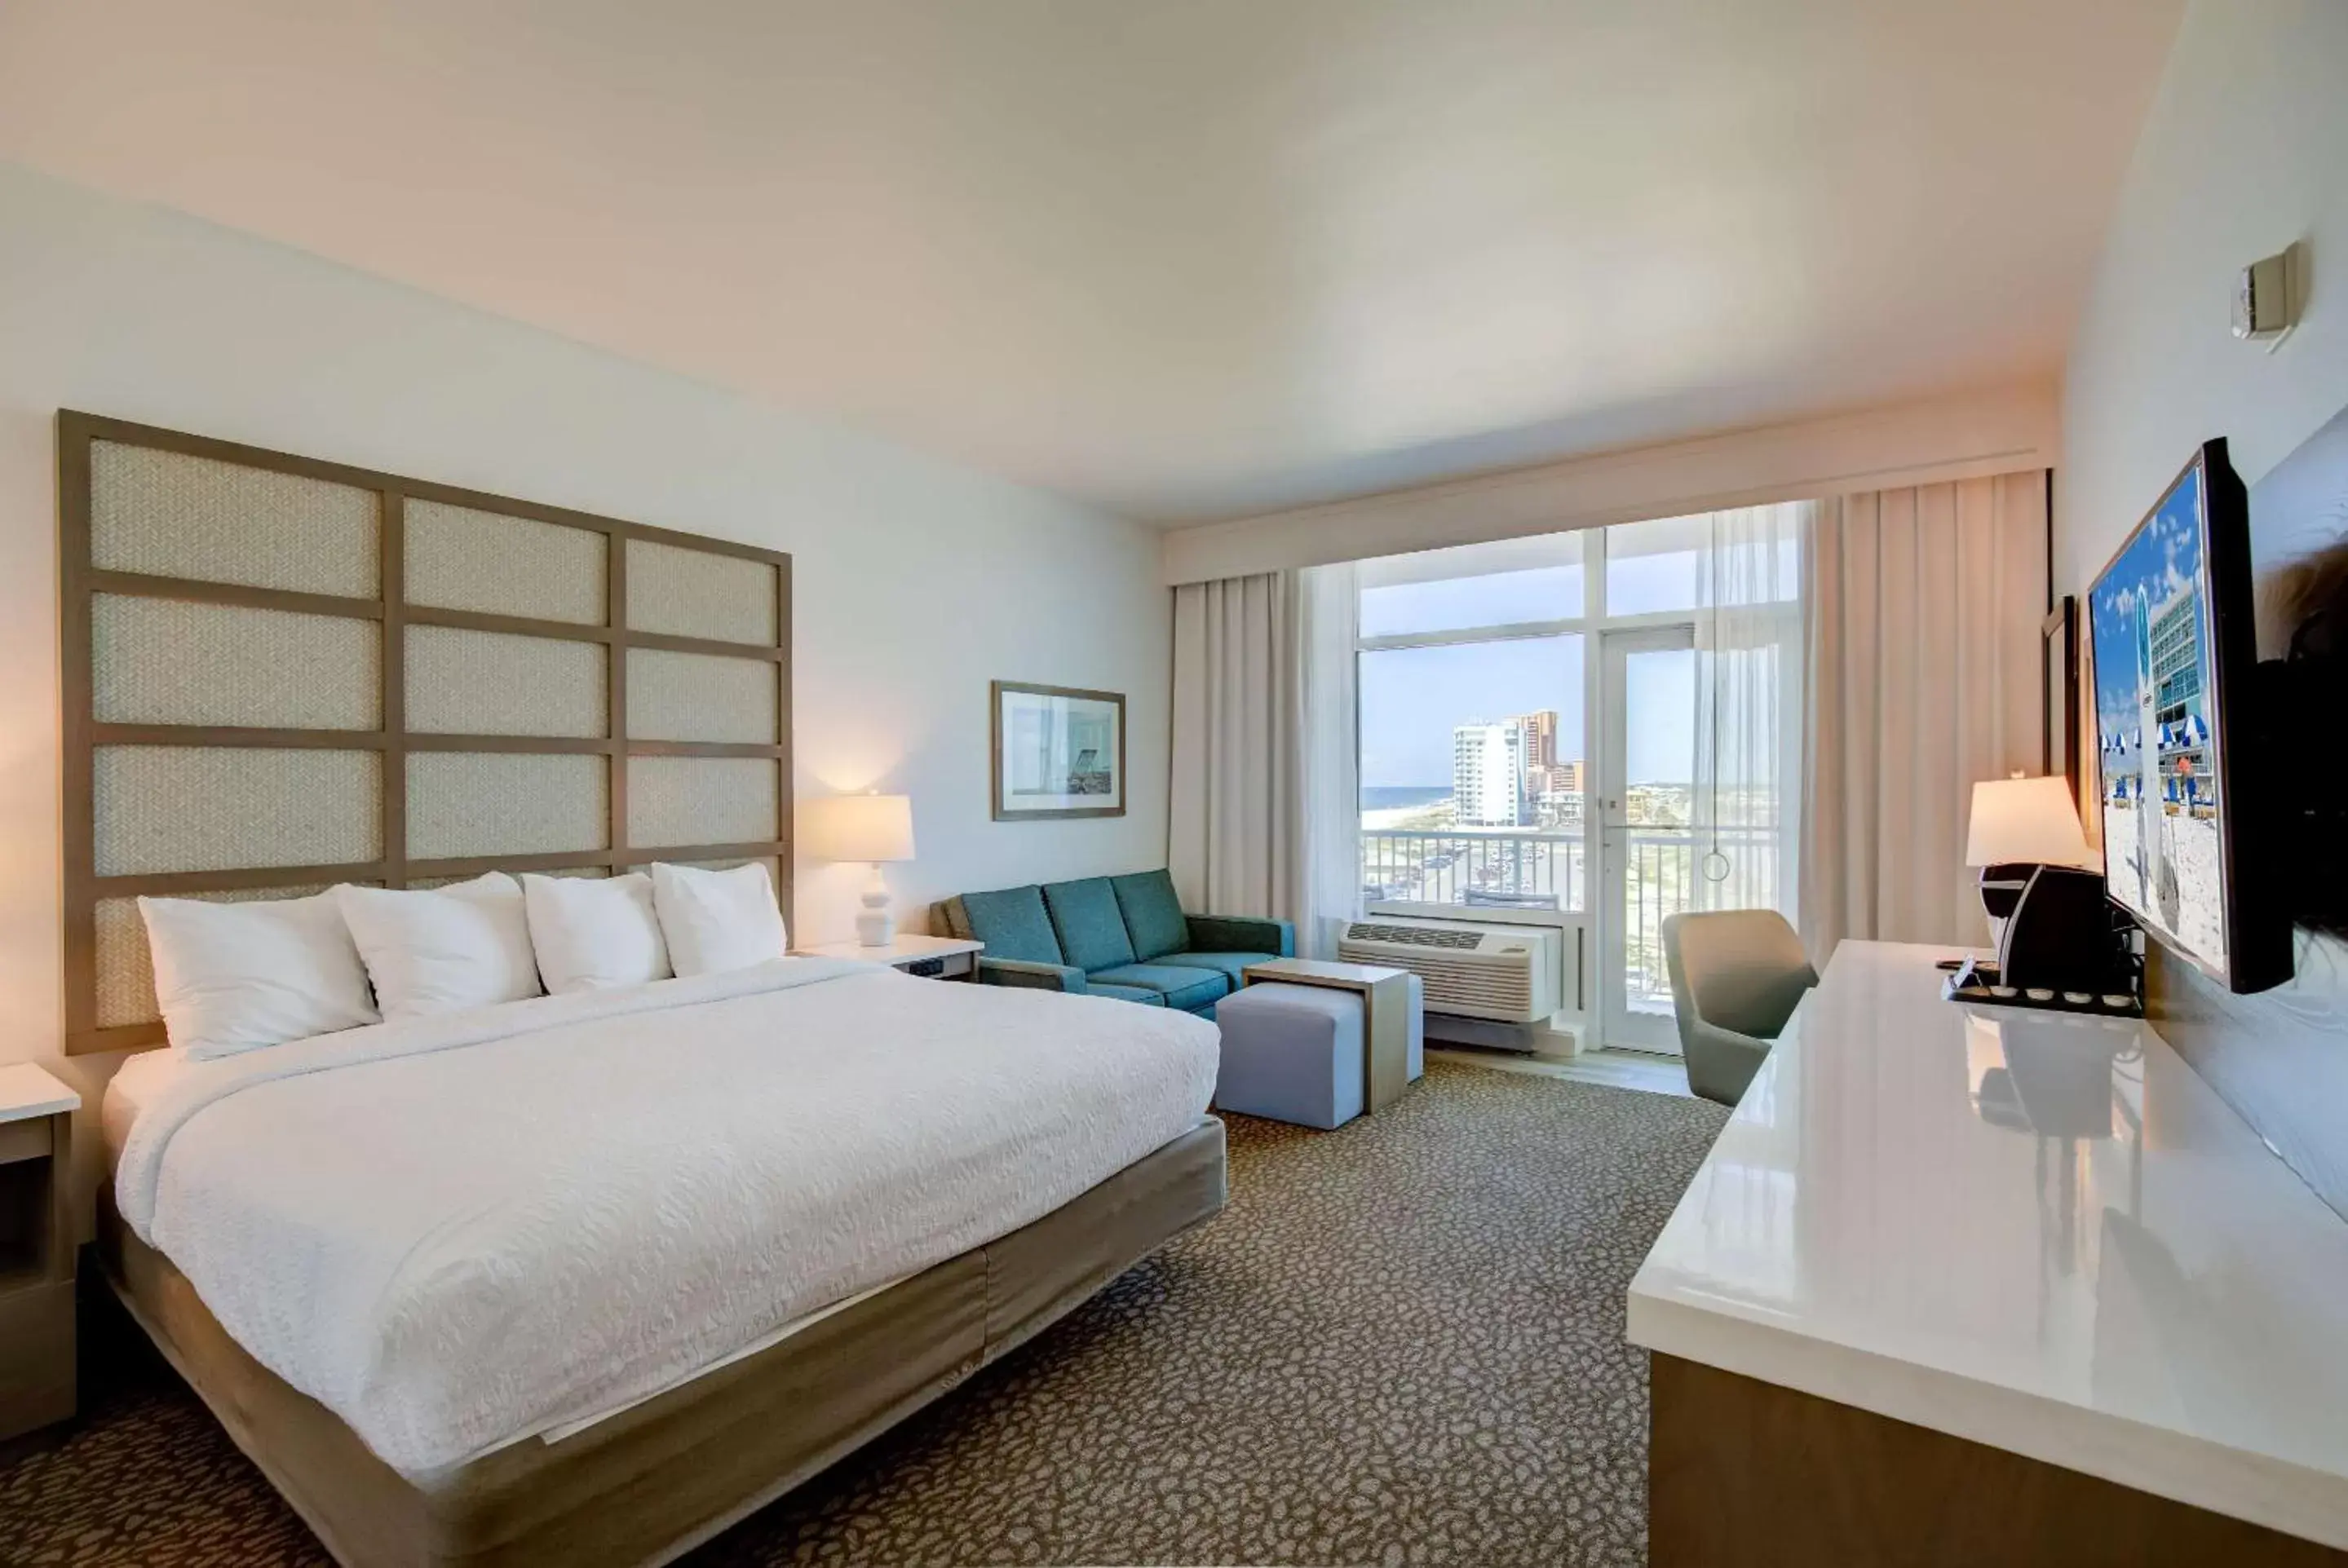 King Room with Sofa Bed and Bath Tub - Balcony/Mobility Accessible in Best Western Premier - The Tides